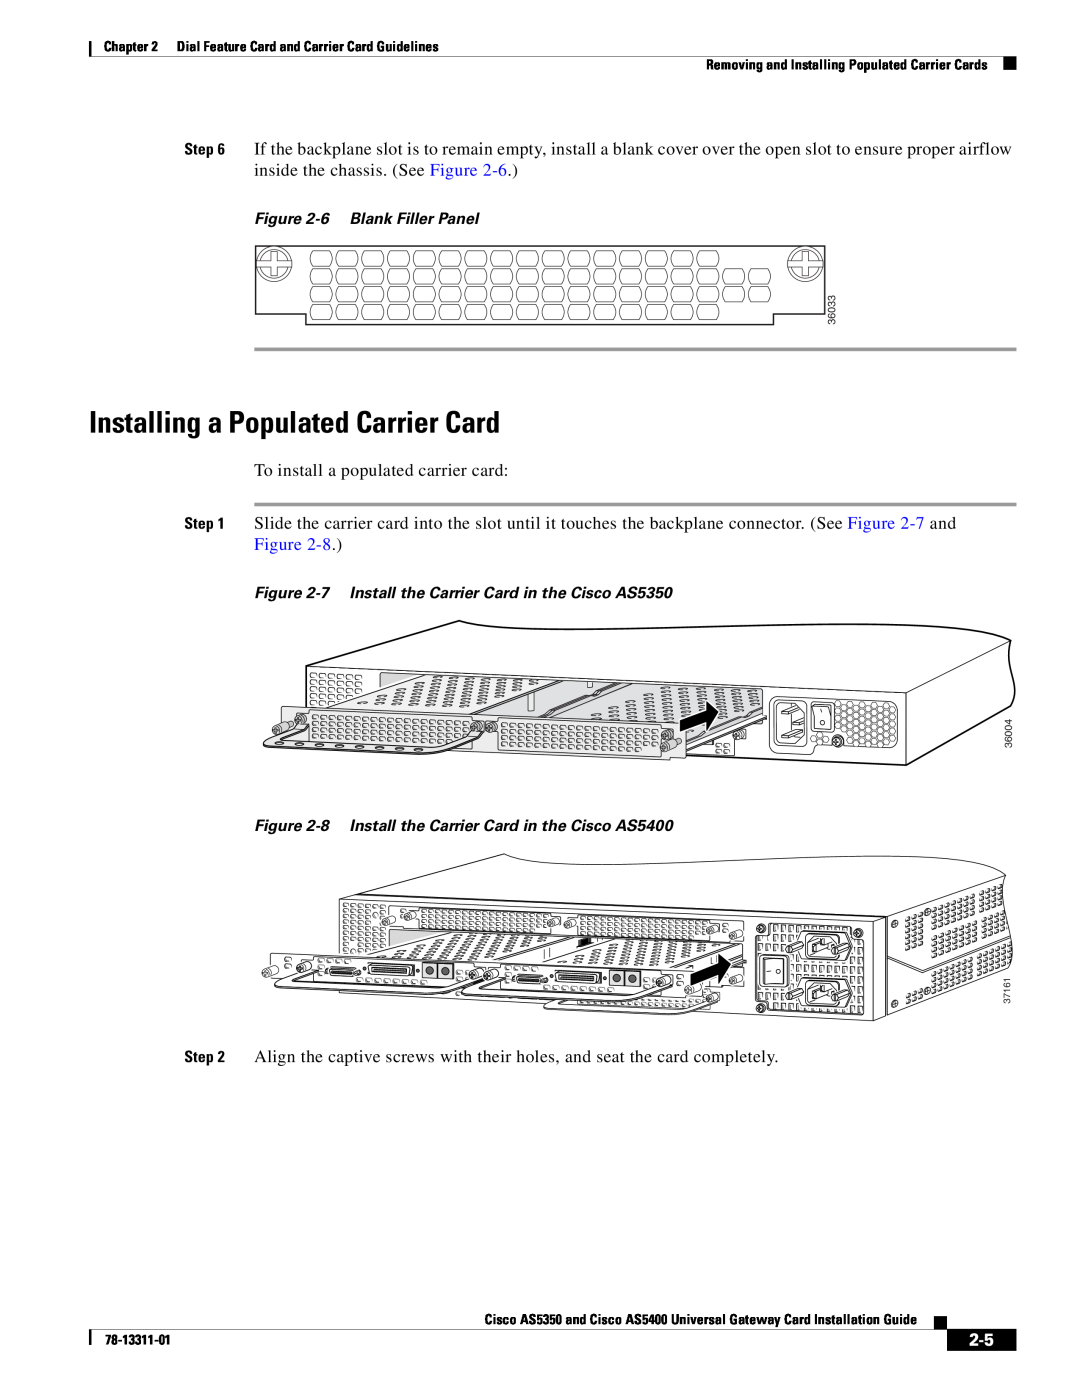 Cisco Systems AS5400 manual Installing a Populated Carrier Card 